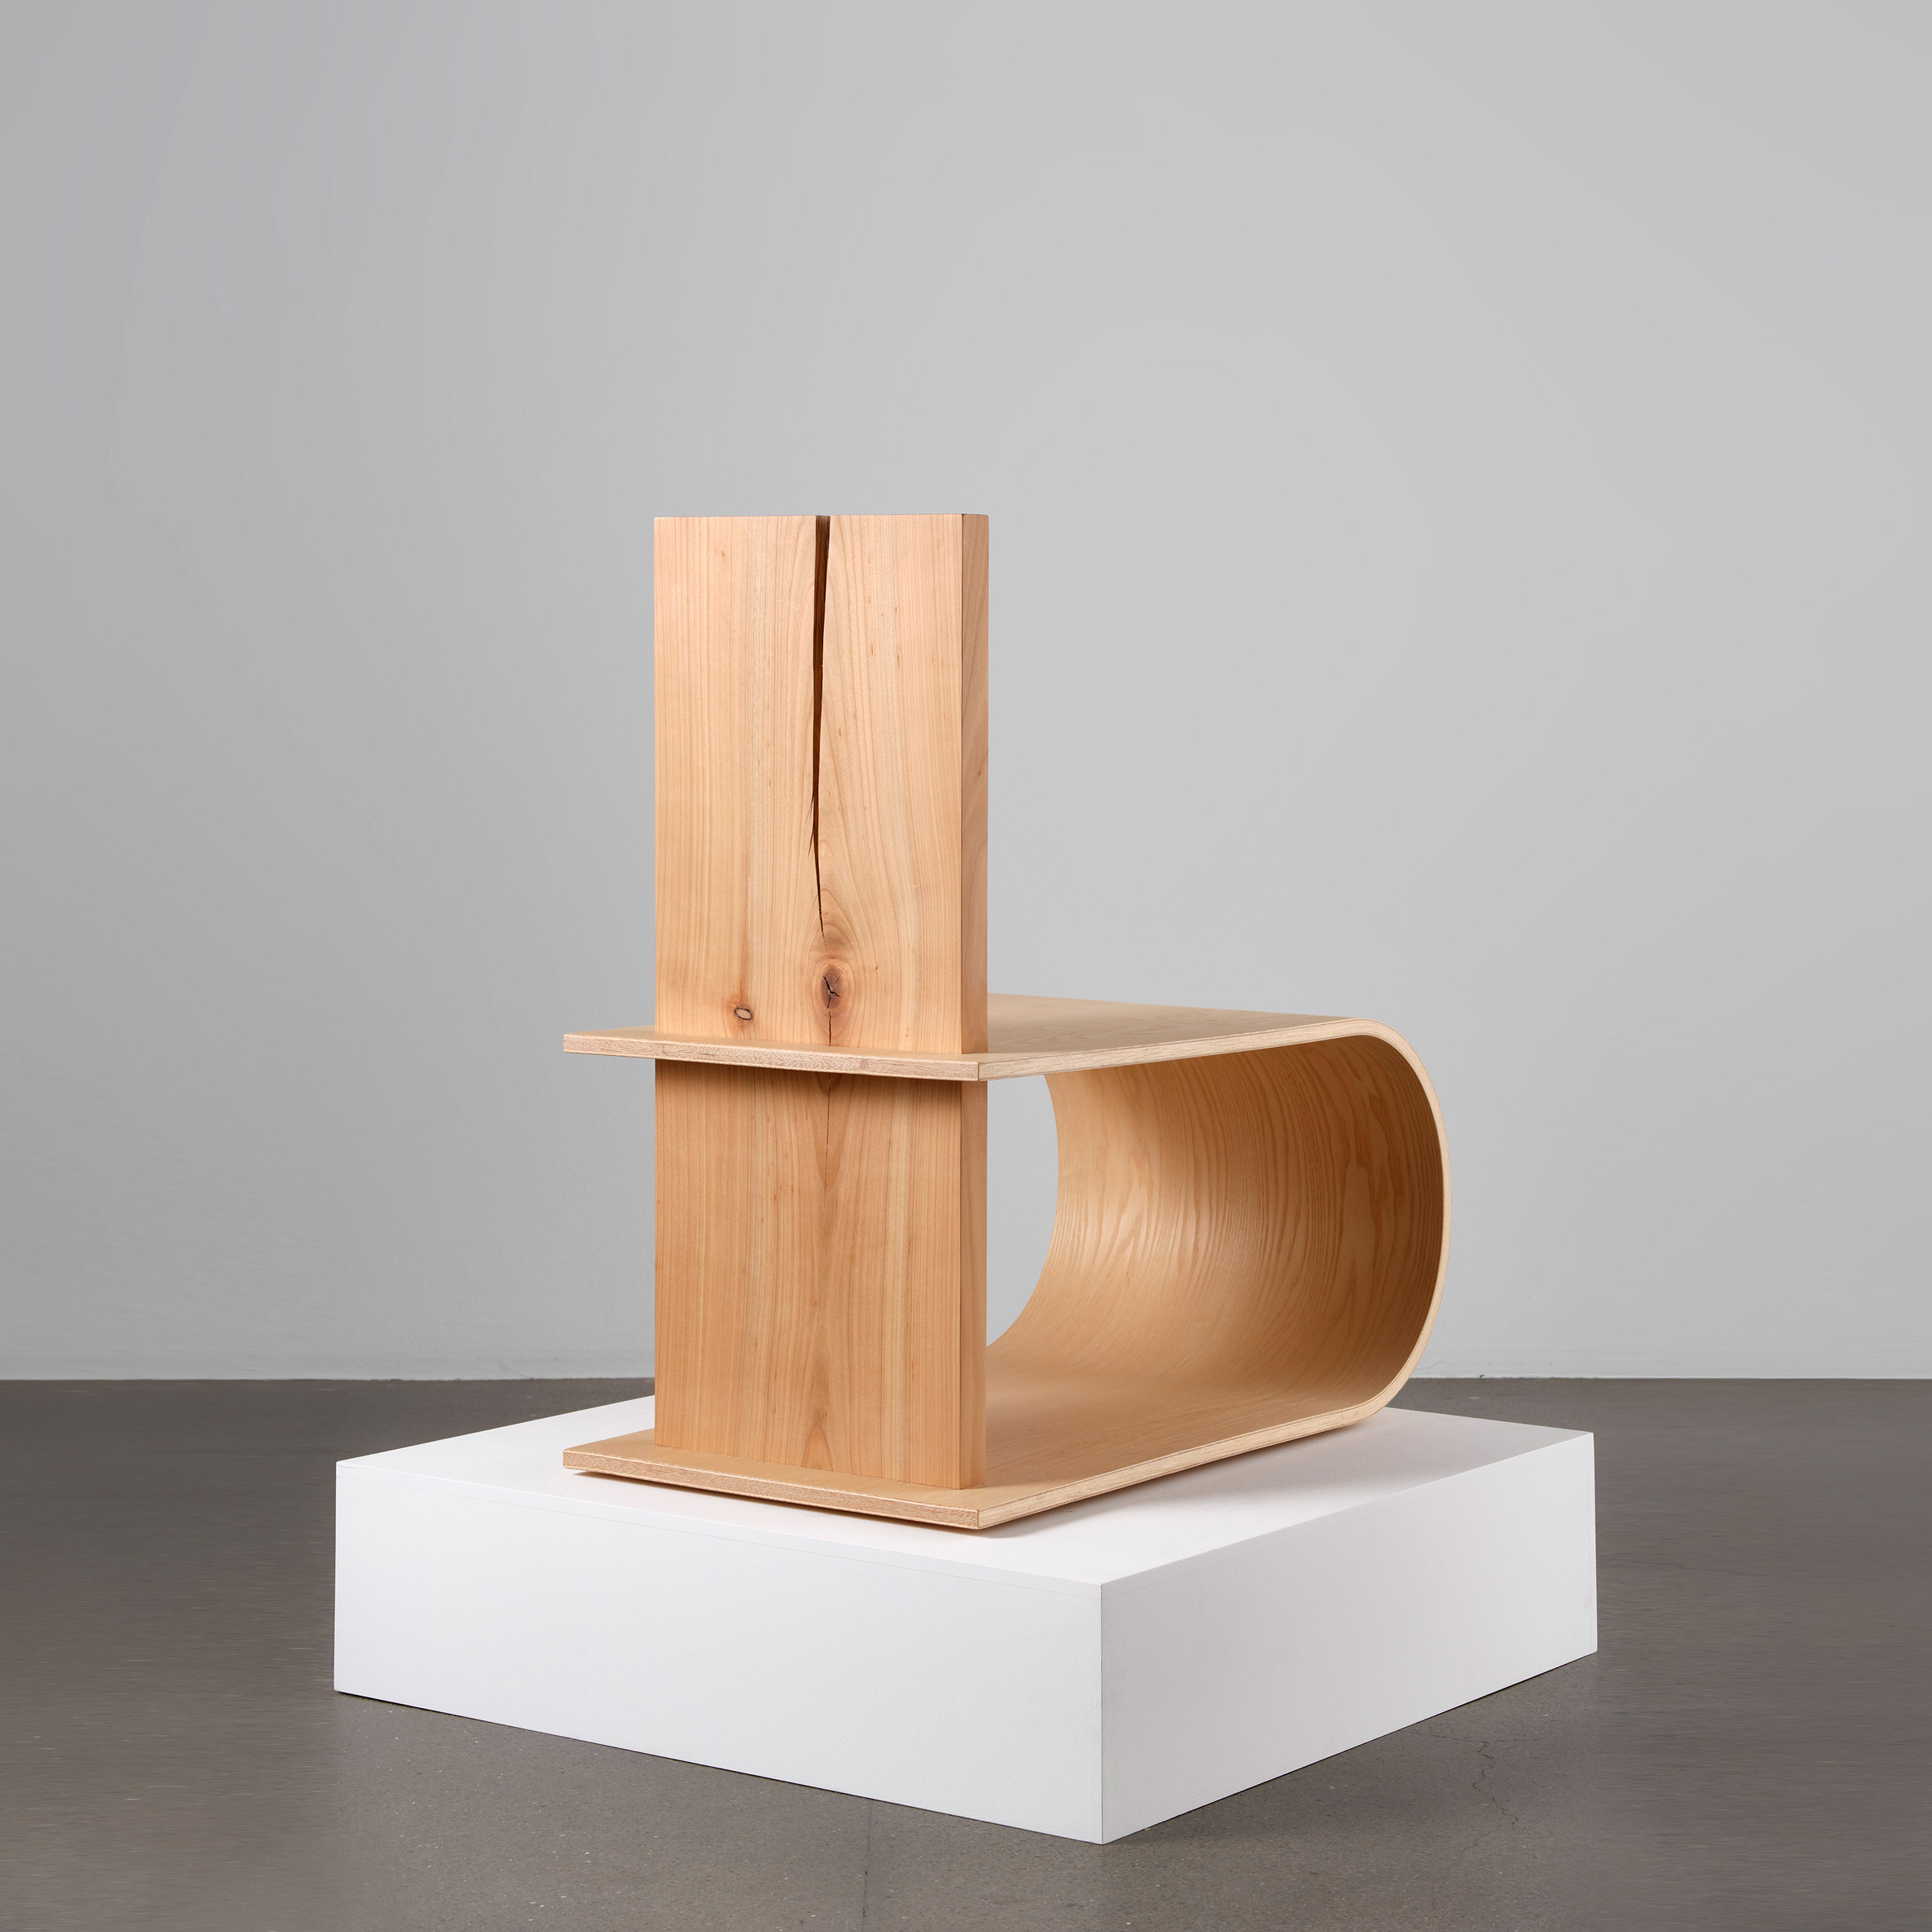 Photograph showing wooden chair on white plinth